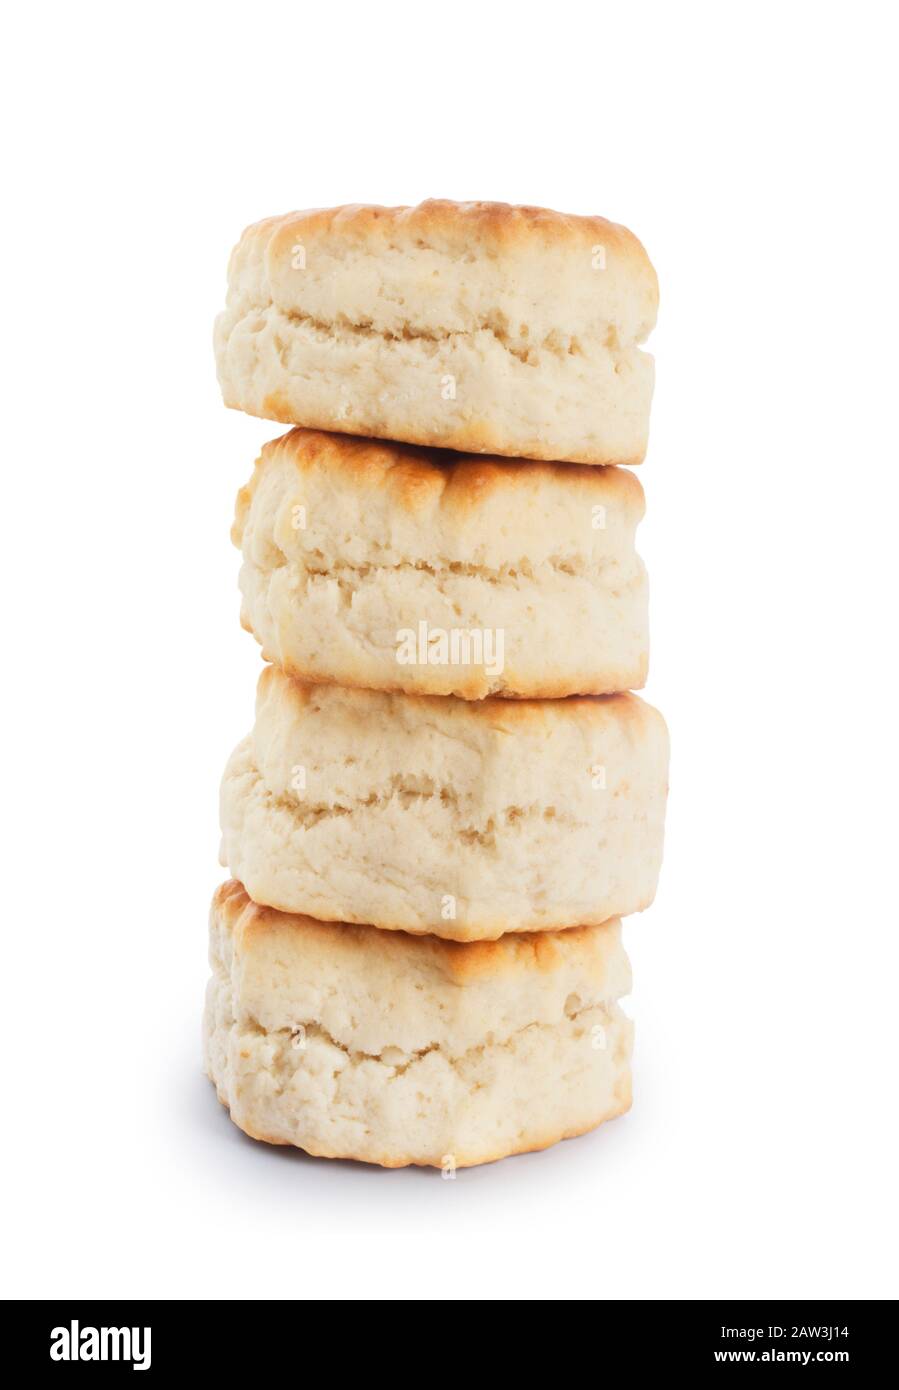 Studio shot of homemade scones cut out against a white background - John Gollop Stock Photo